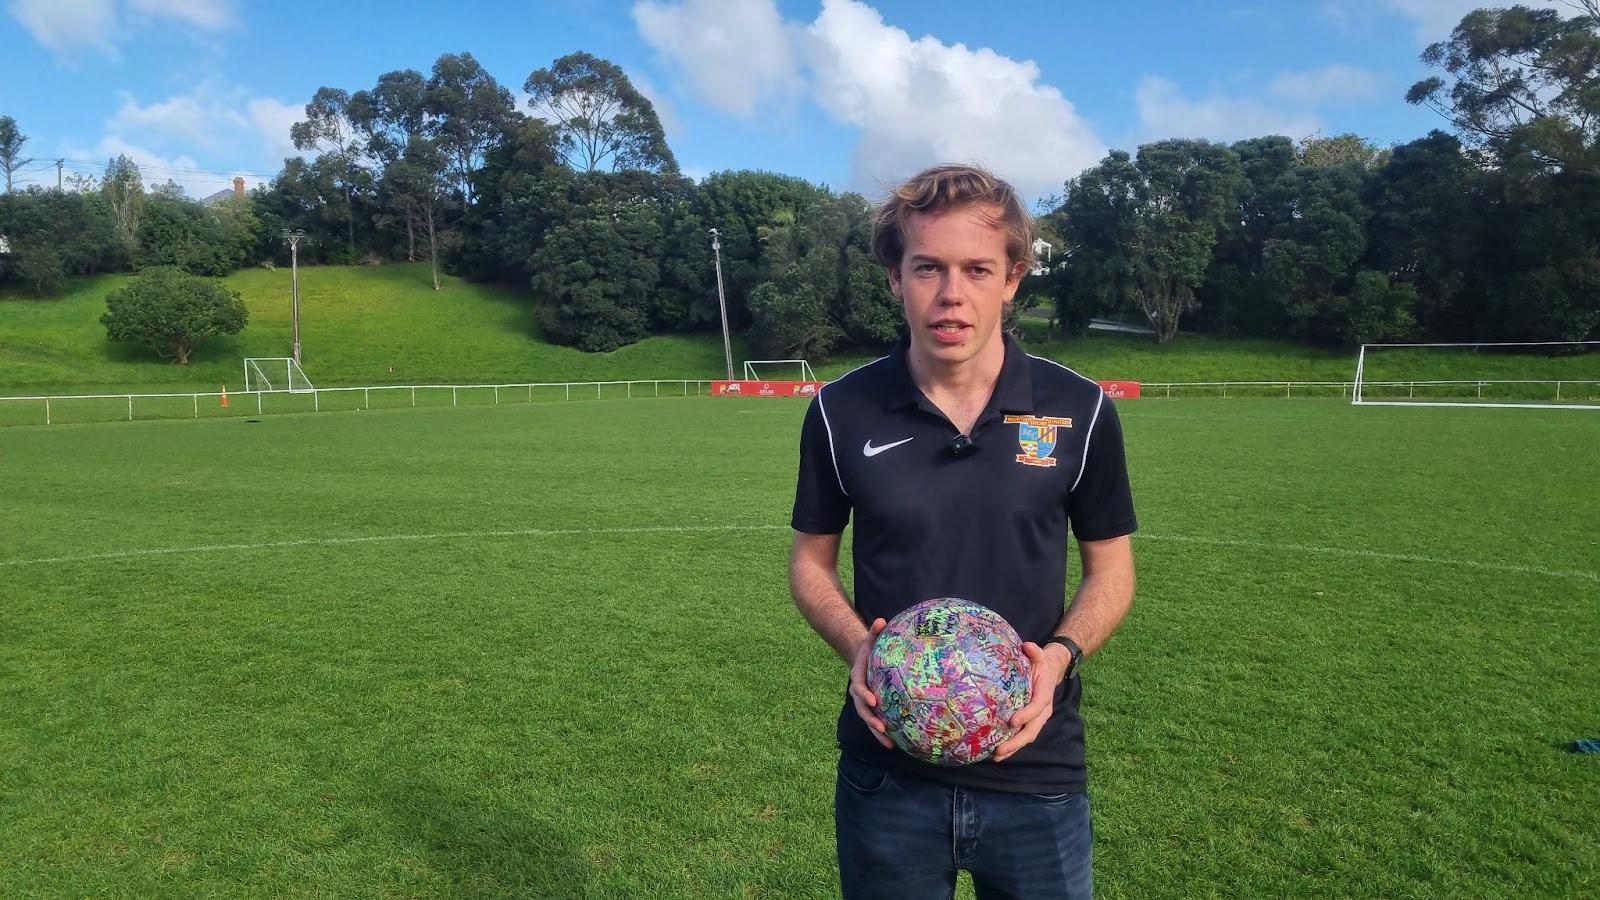 Jack Collinson, Women’s team coach and board member for North Shore United, pledged on behalf of the club to send an equal number of men and women to New Zealand Football training courses